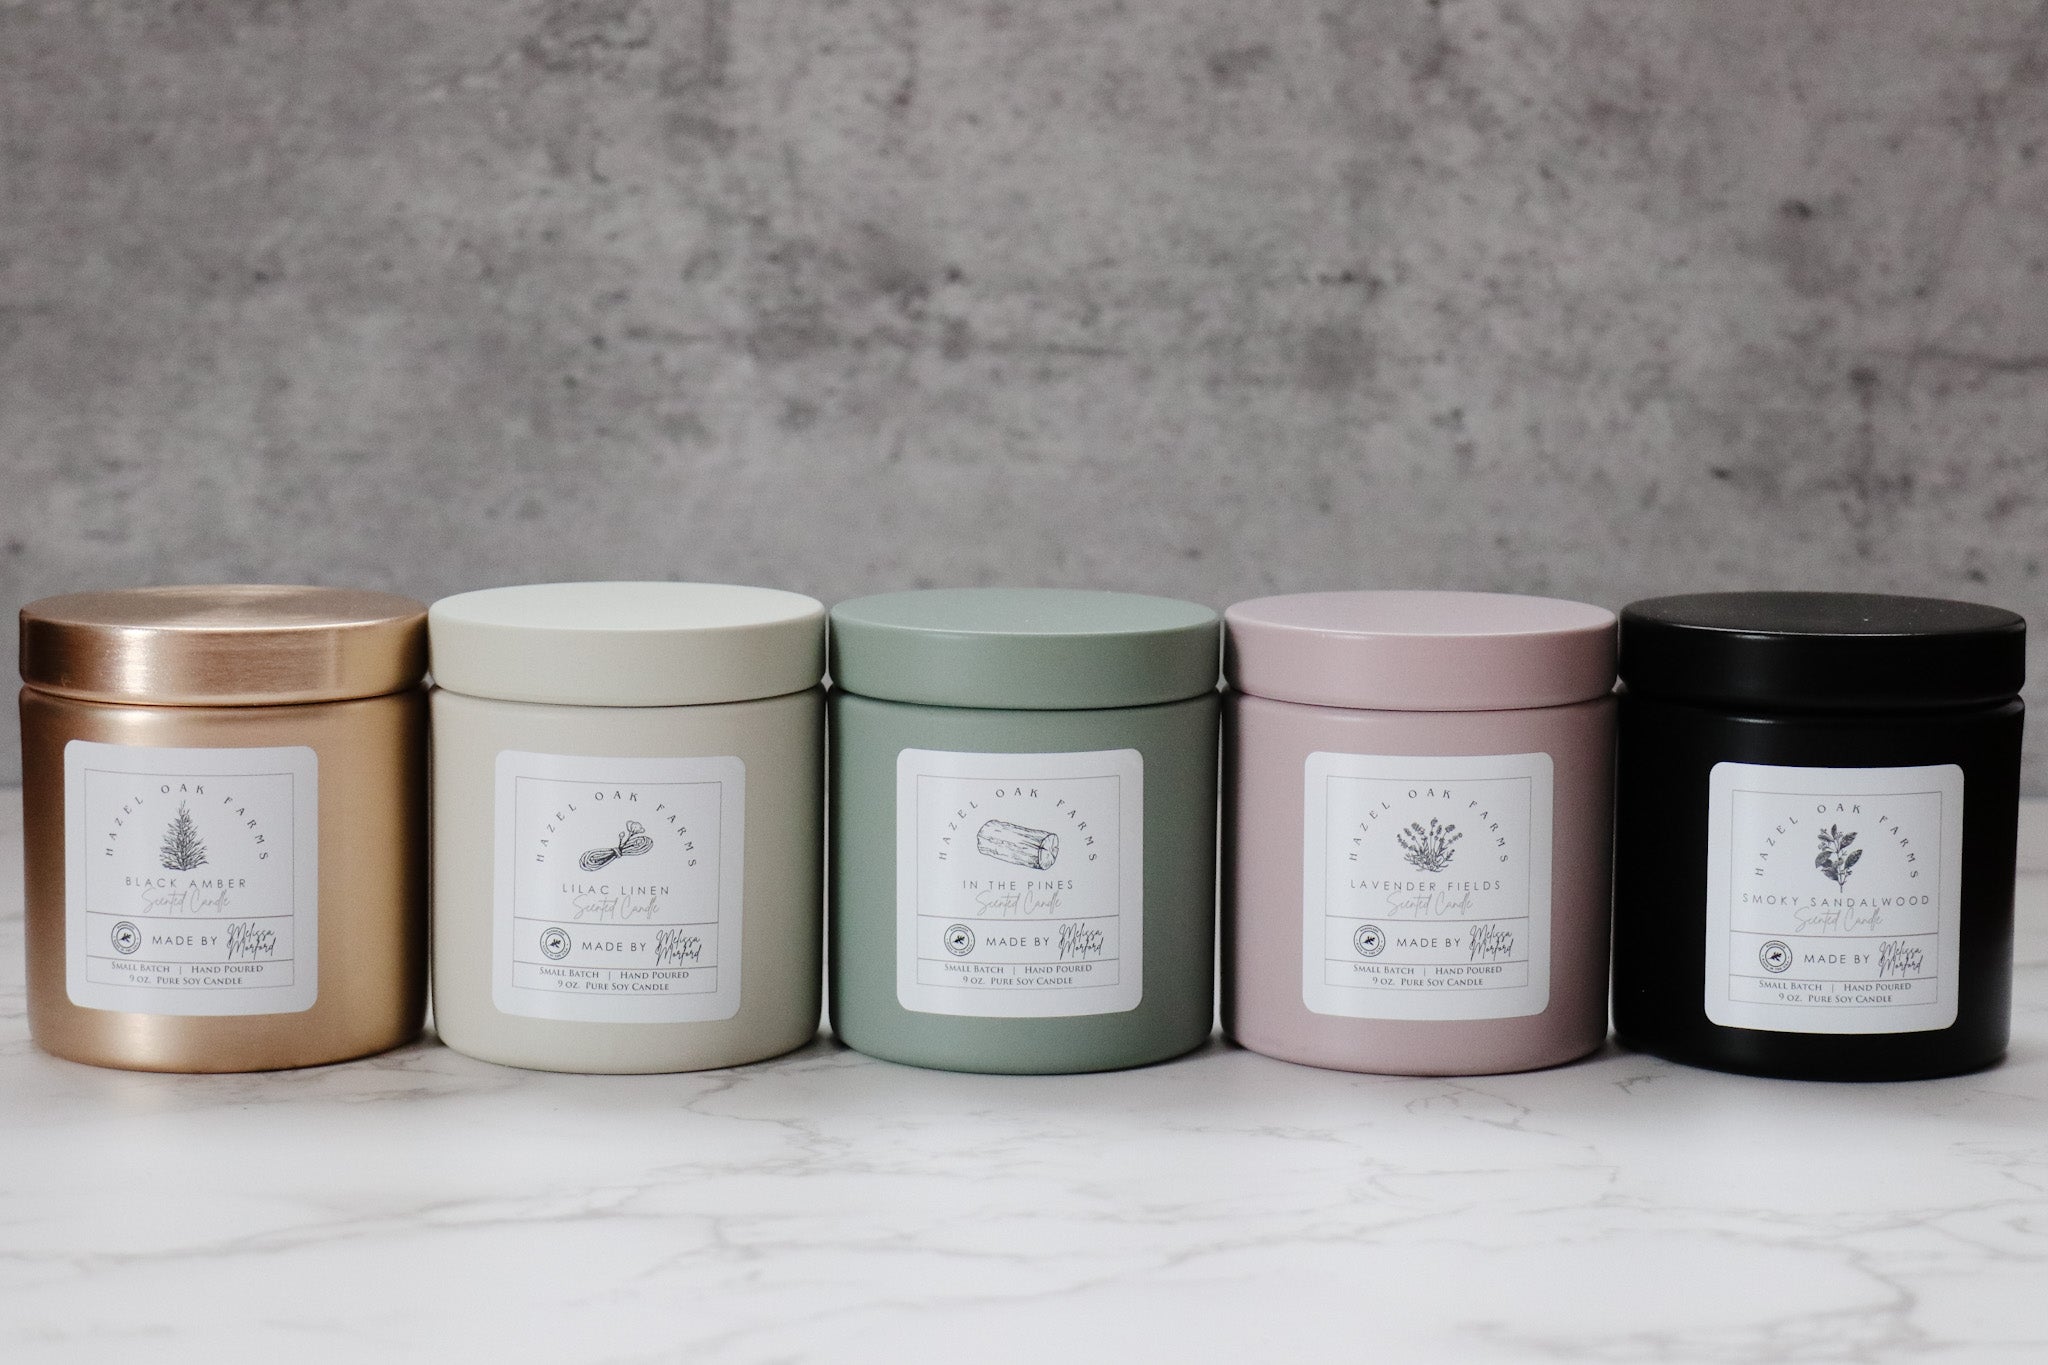 Lilac and Linen - Melissa's Pure Soy Candles (in stock) - Hazel Oak Farms